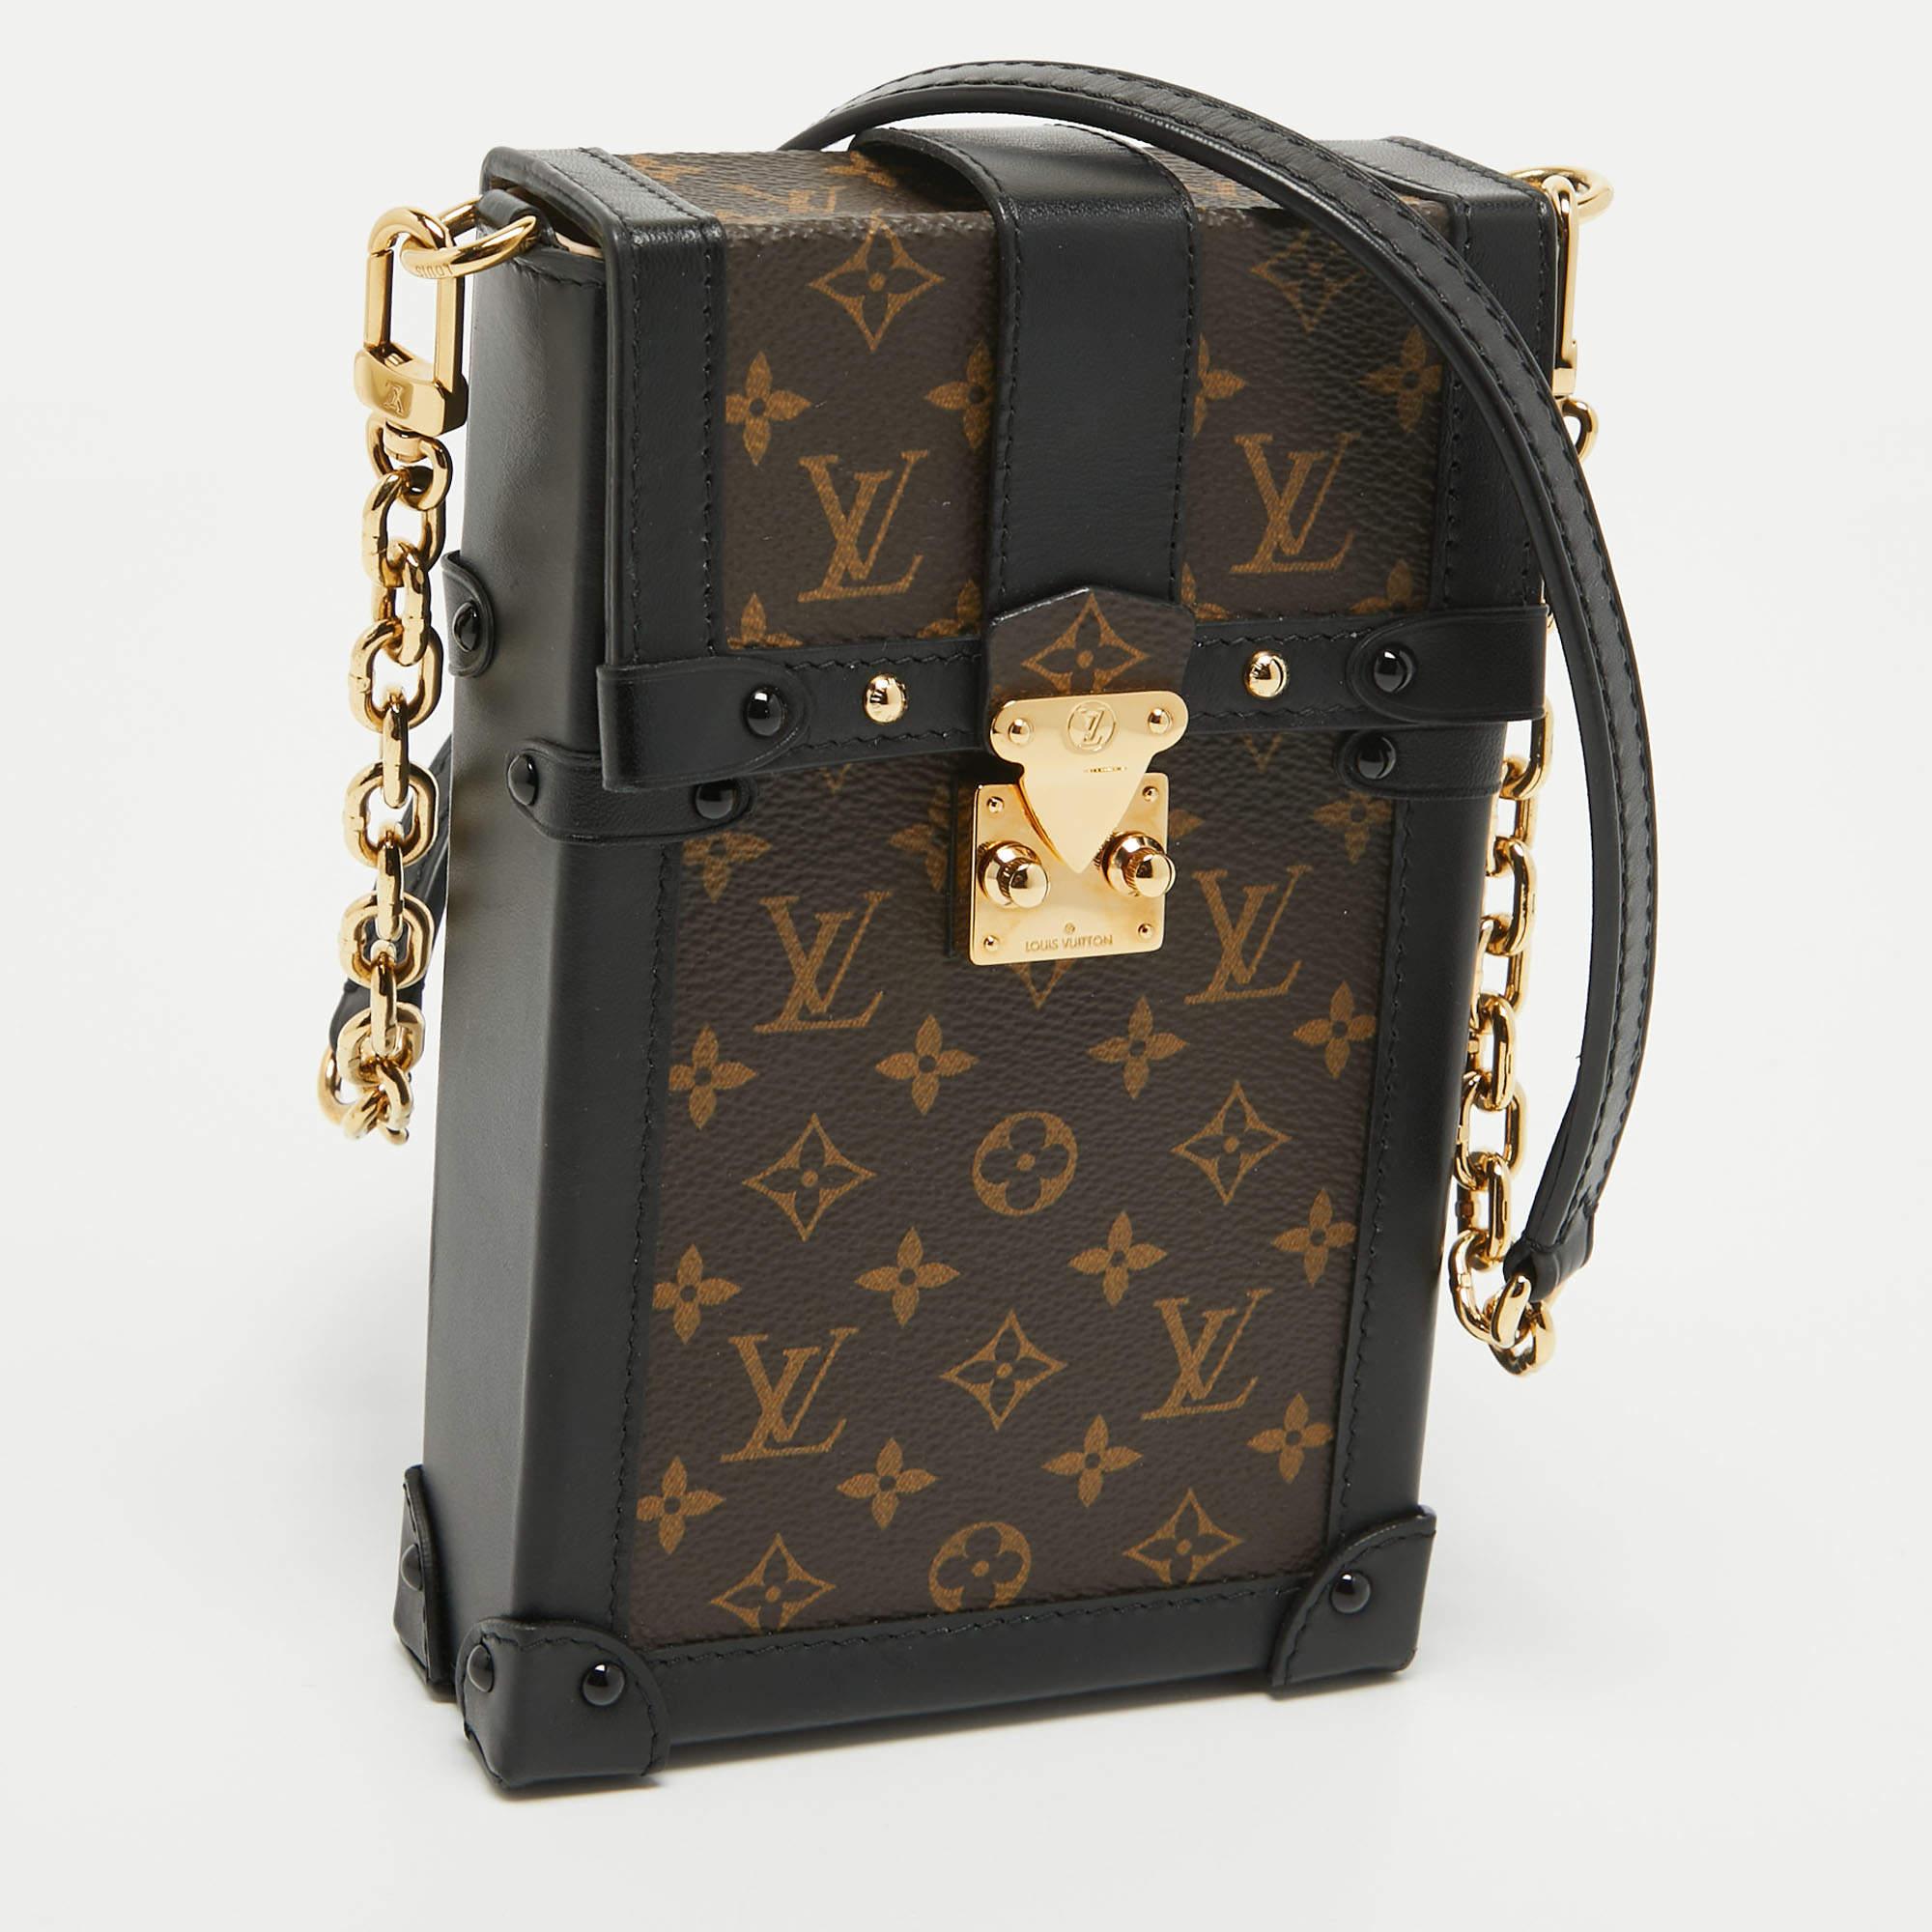 The Louis Vuitton Trunk Pochette is a luxurious accessory featuring the iconic LV monogram canvas and supple leather accents. Its vertical trunk-inspired design exudes sophistication, with a compact yet spacious interior, making it a stylish and